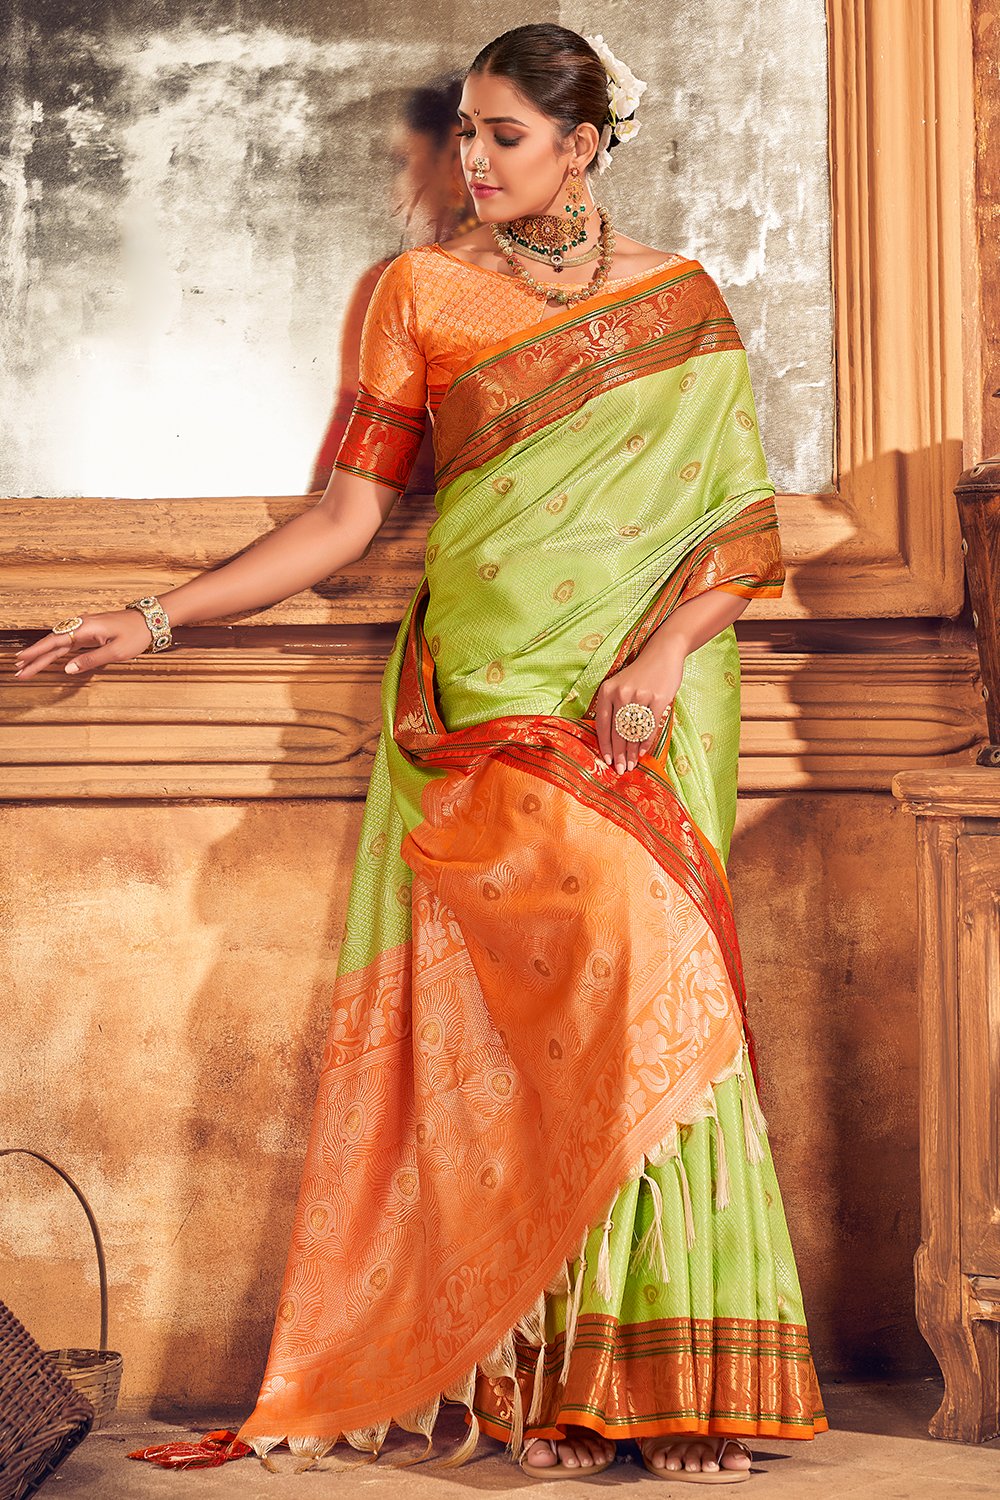 Womens Cotton Green Saree With Blouse Piece